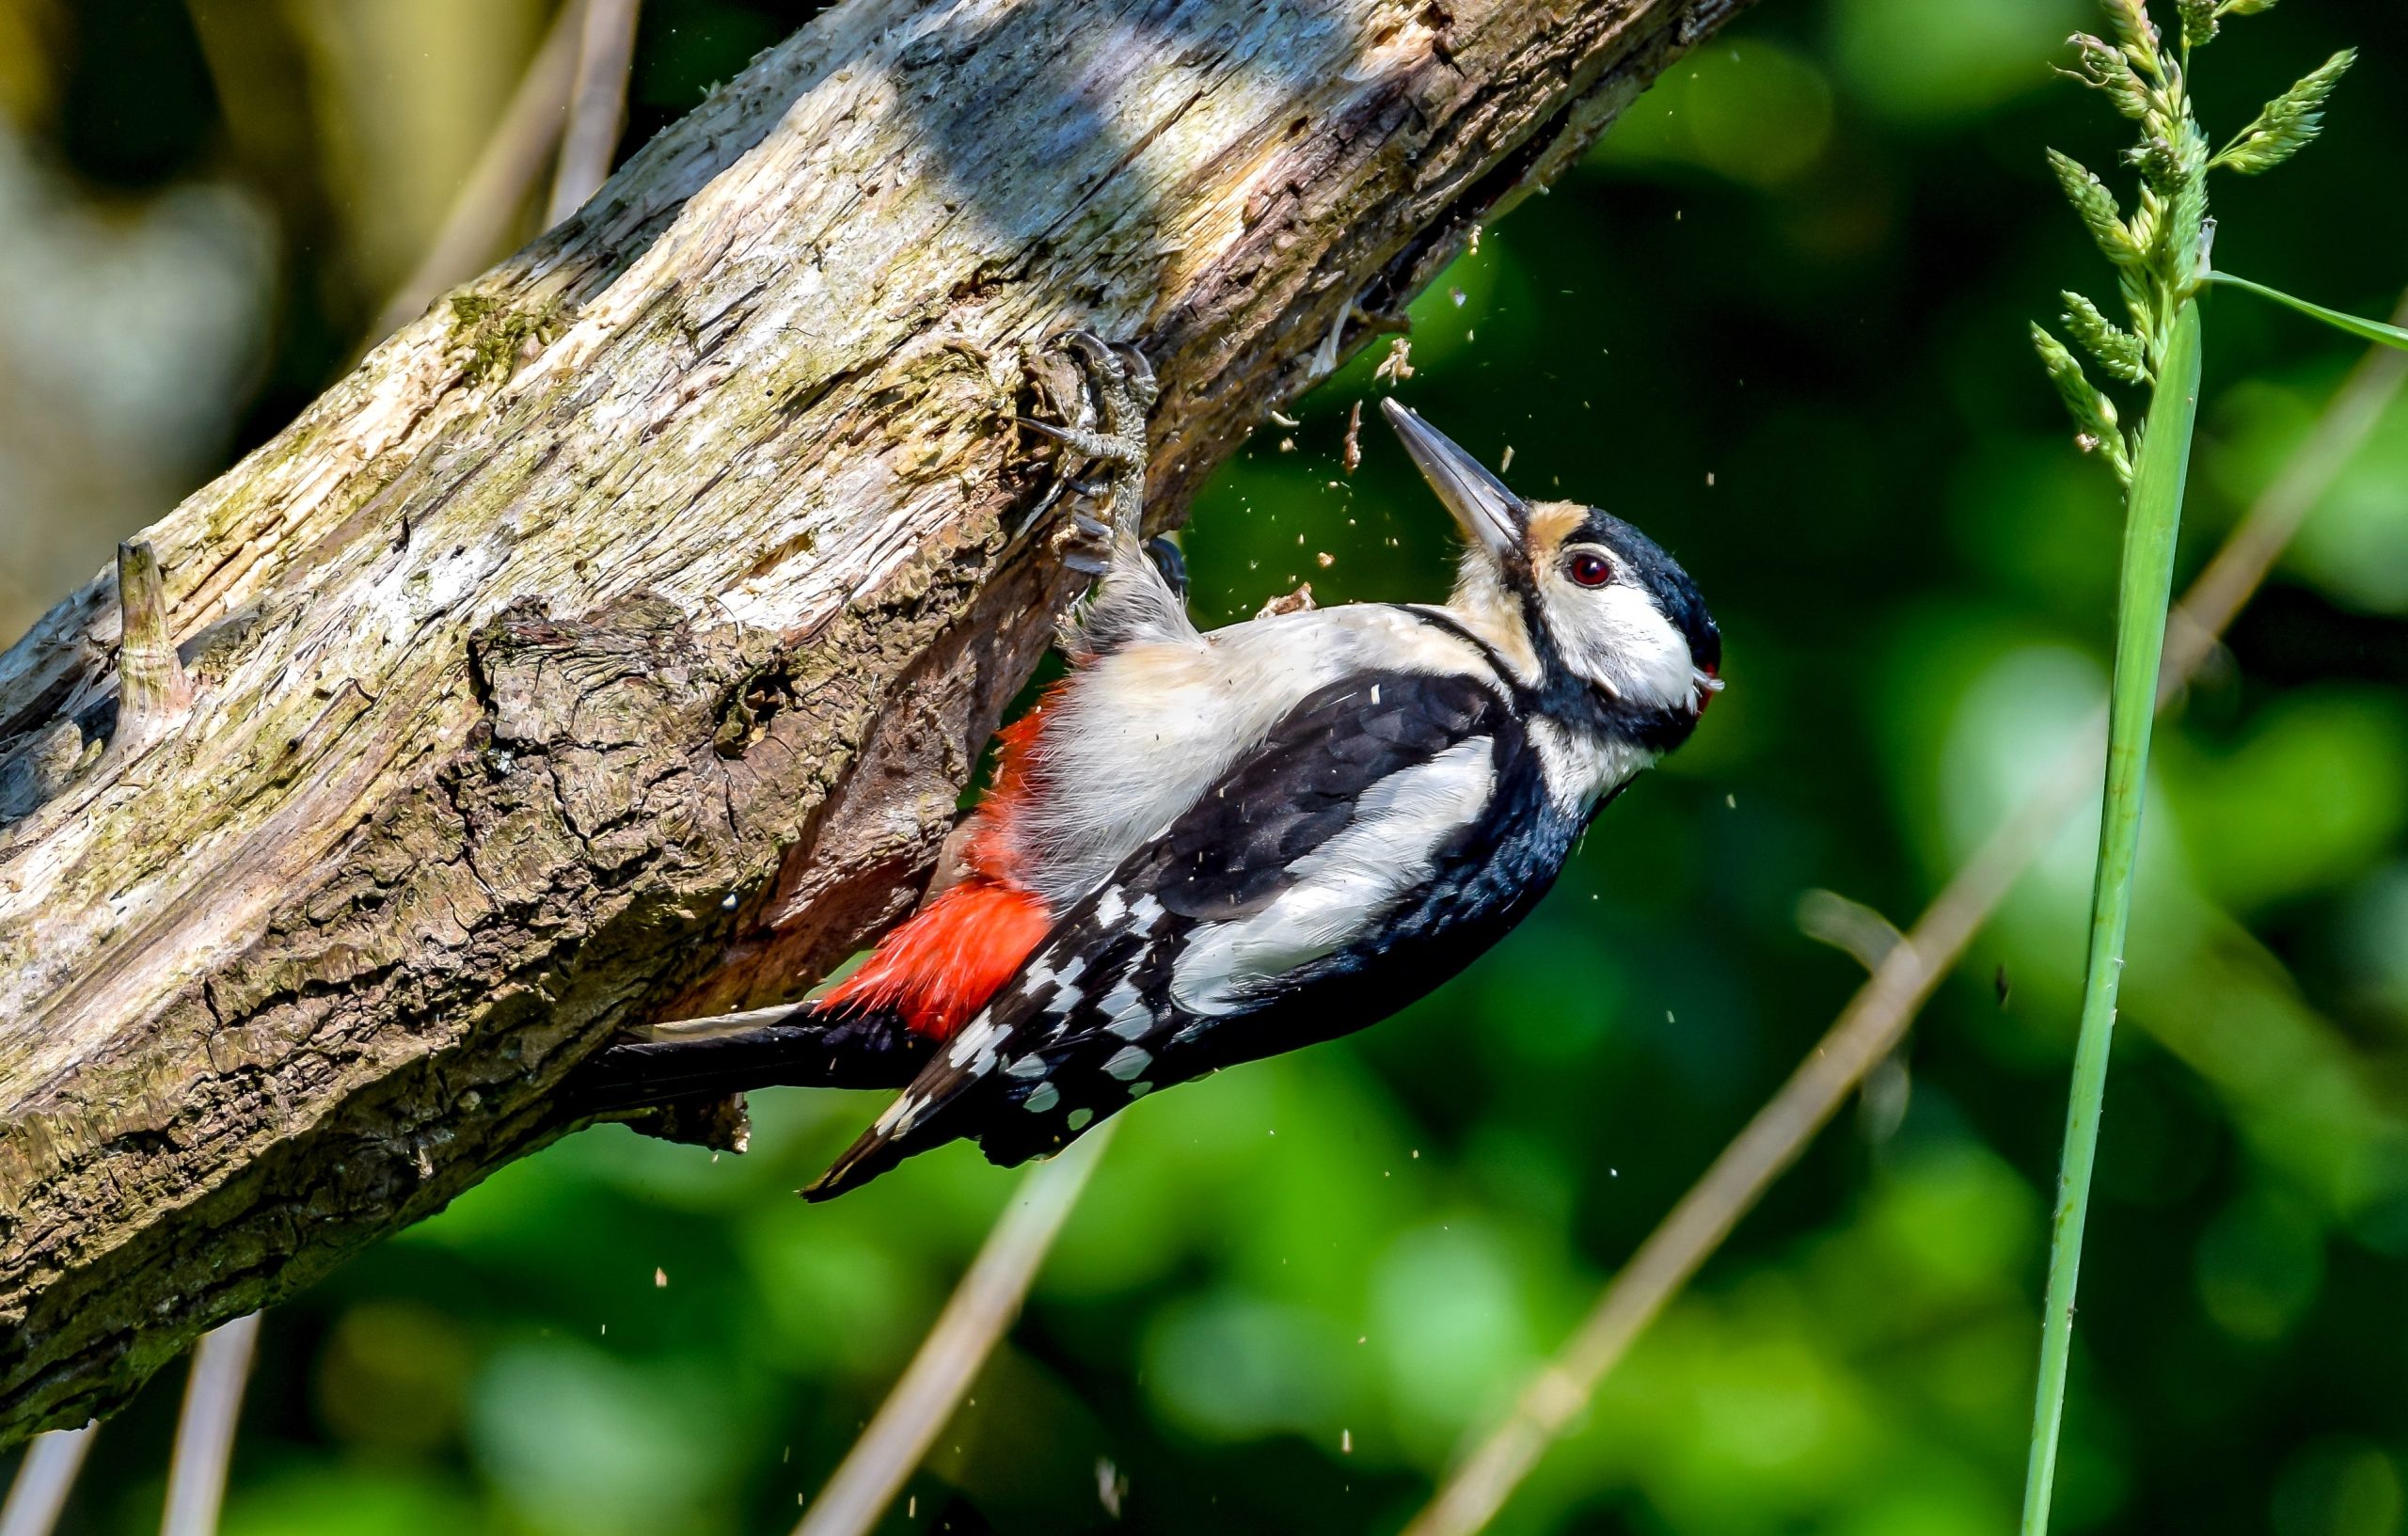 A woodpecker pecking the tree wood and making a hole.